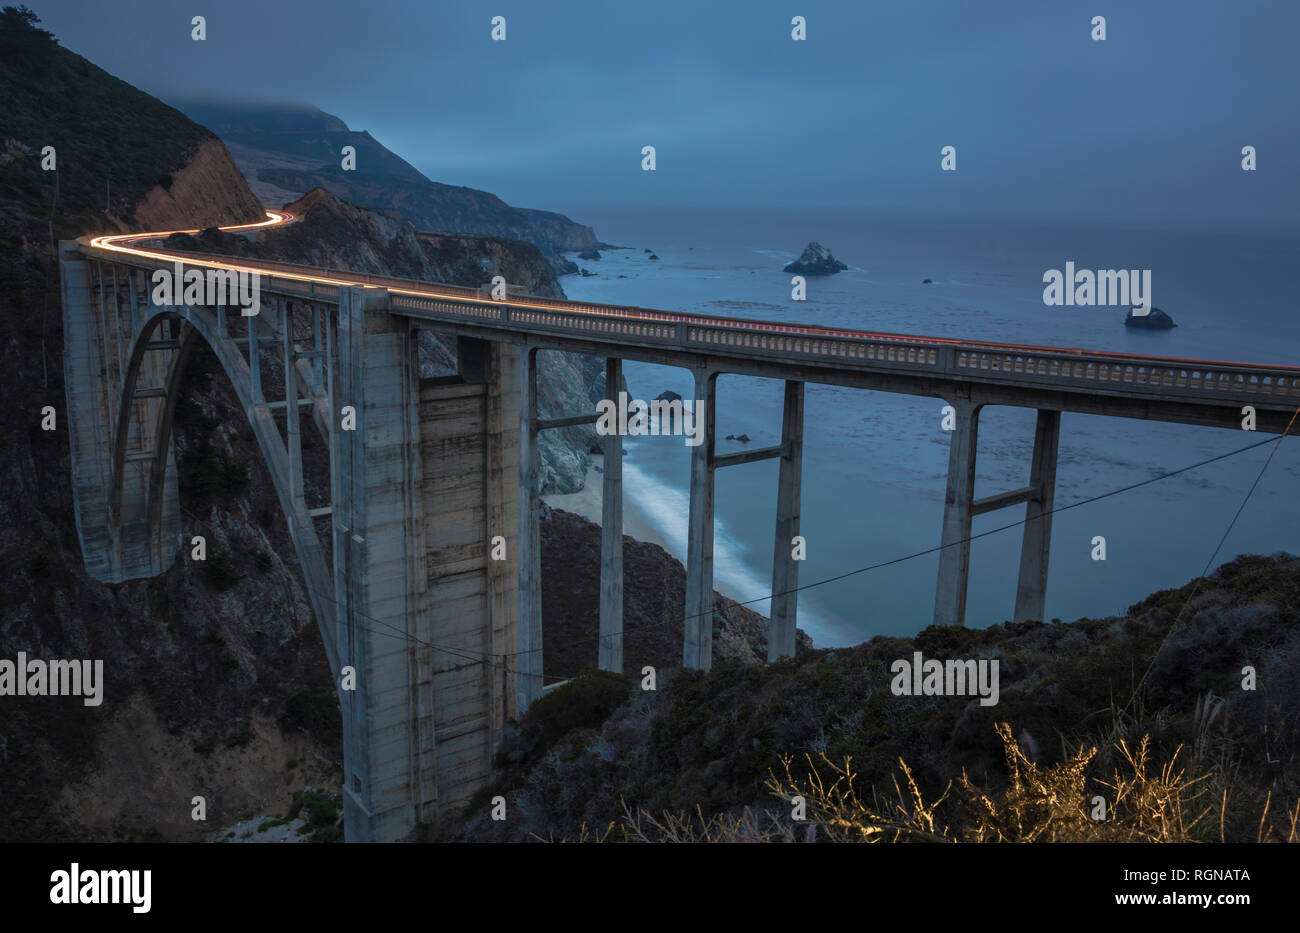 USA, California, Big Sur, Pacific Coast, National Scenic Byway, Bixby Creek Bridge, California State Route 1, Highway 1 in the evening Stock Photo